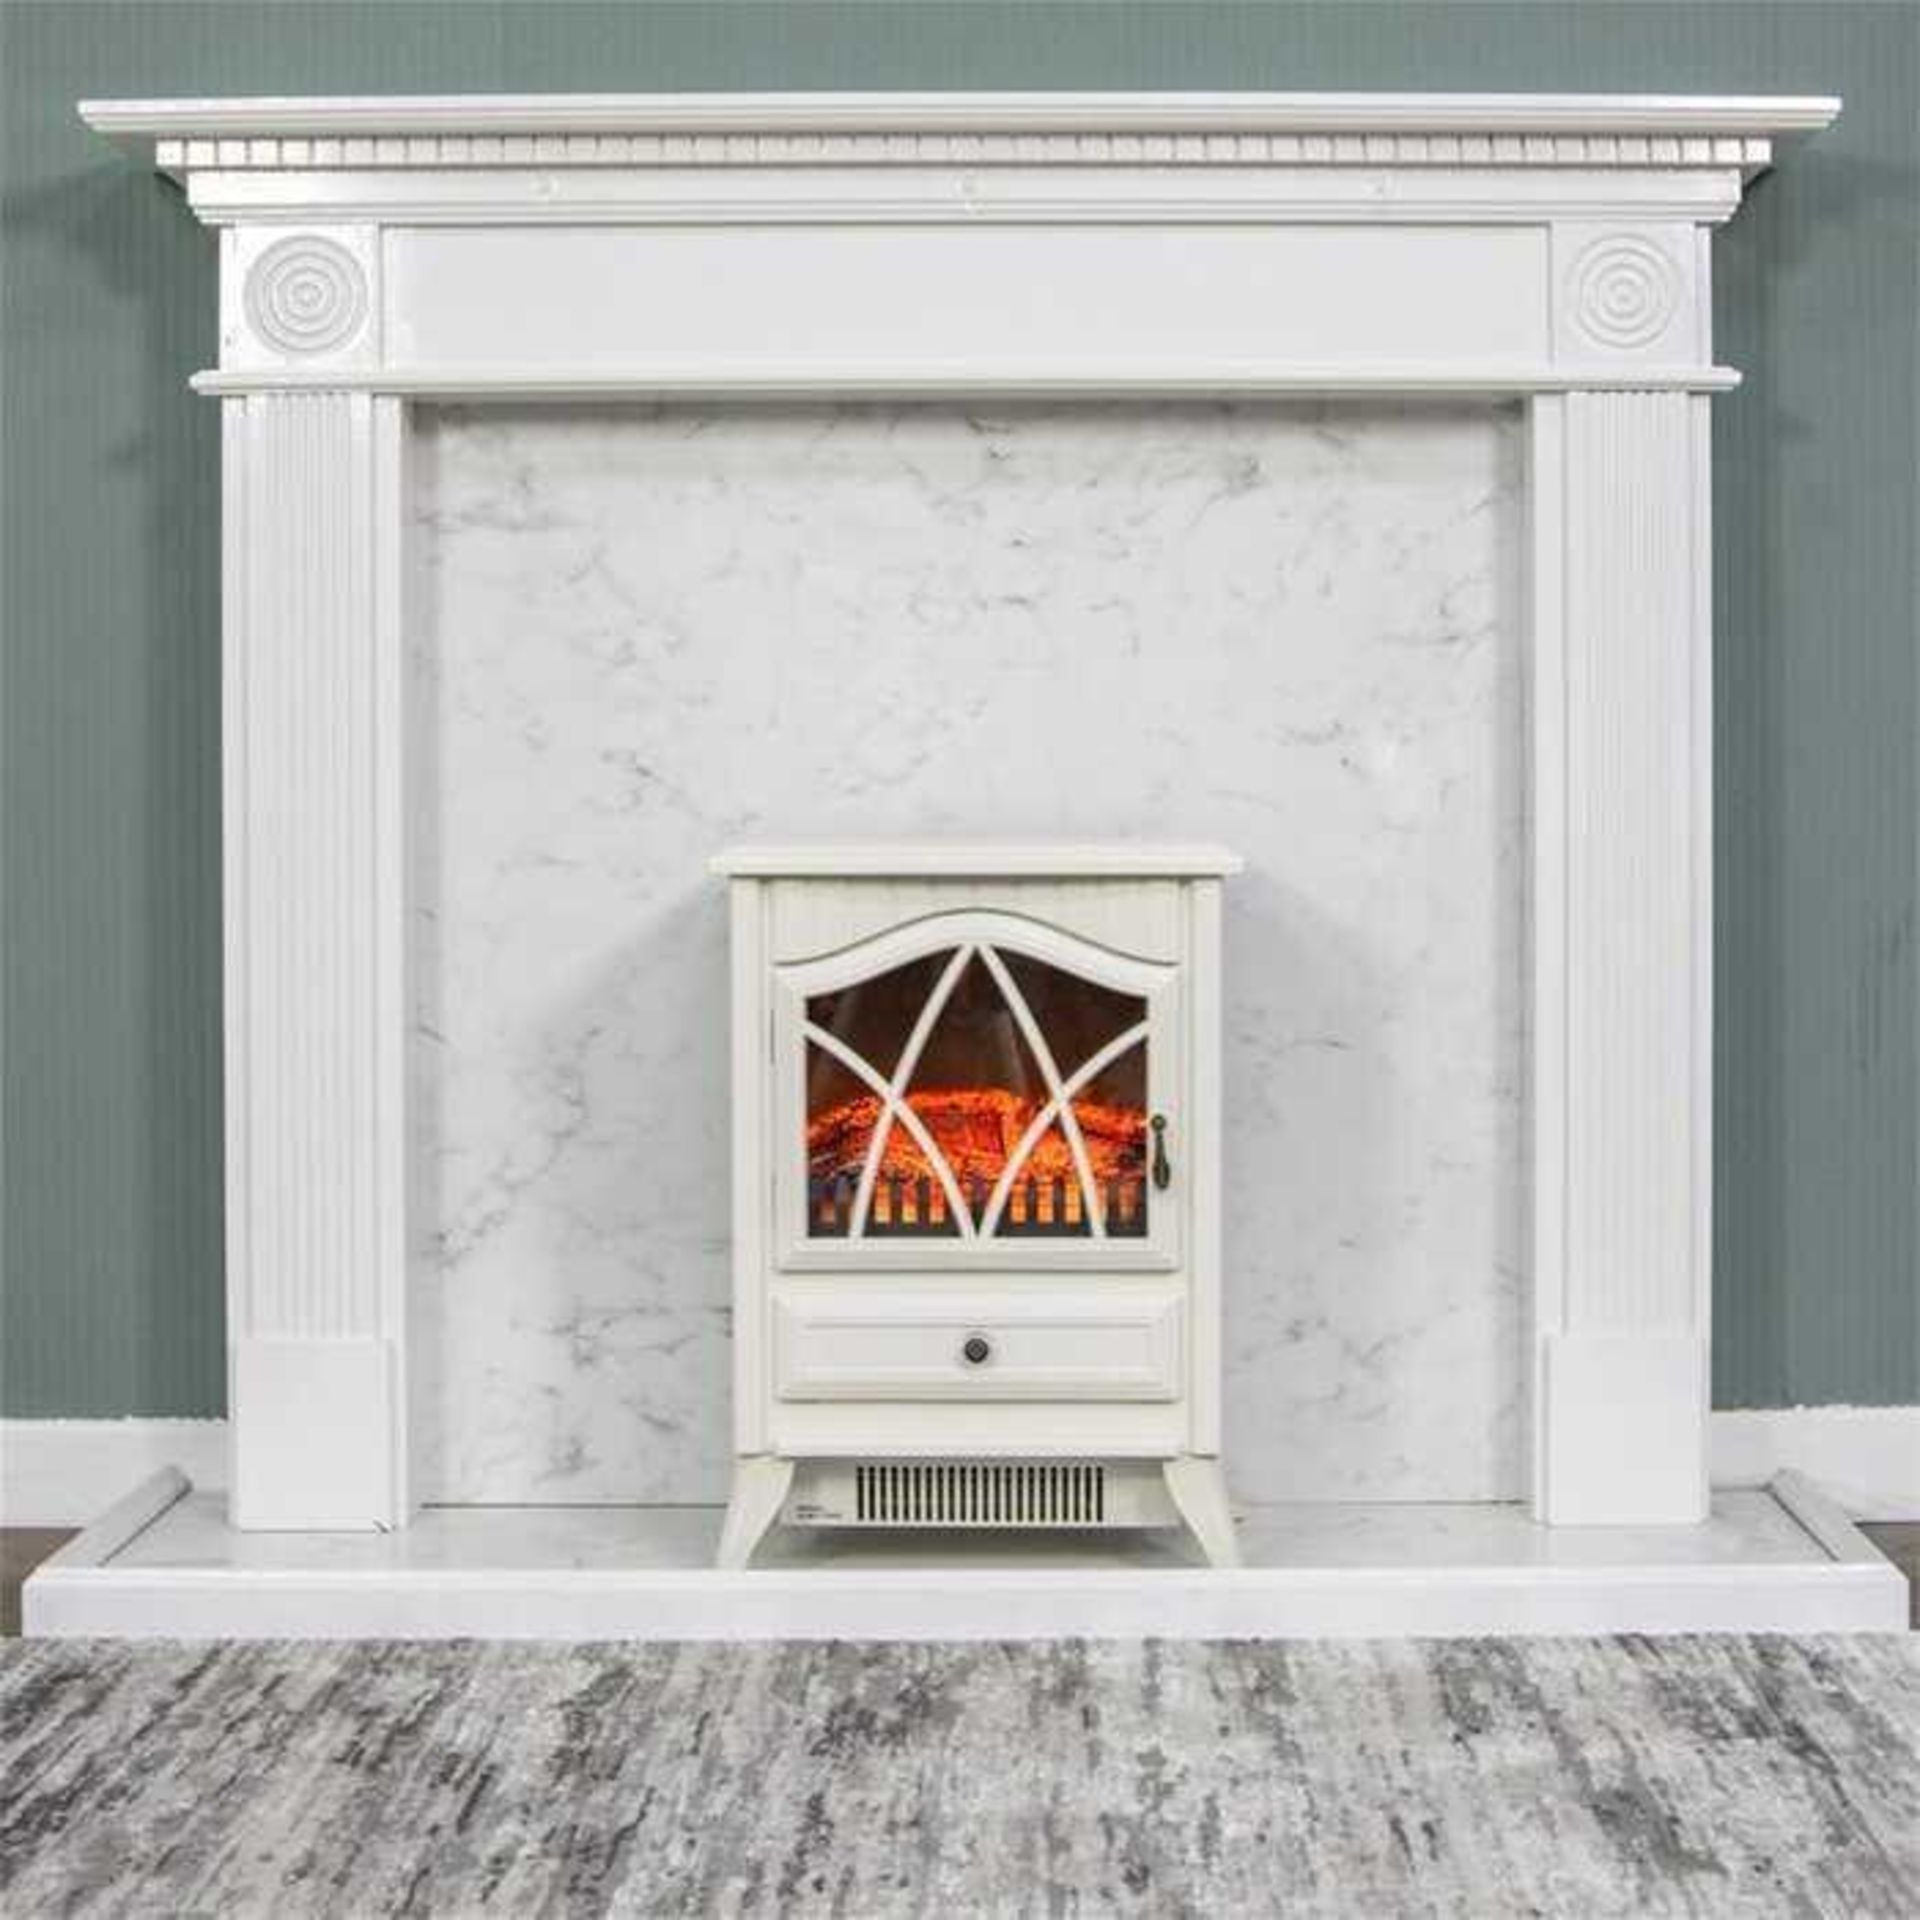 RRP £390 Lot To Contain 1X Boxed Minka Rosalind Wheeler Electric Stove (Tr) - Image 2 of 4